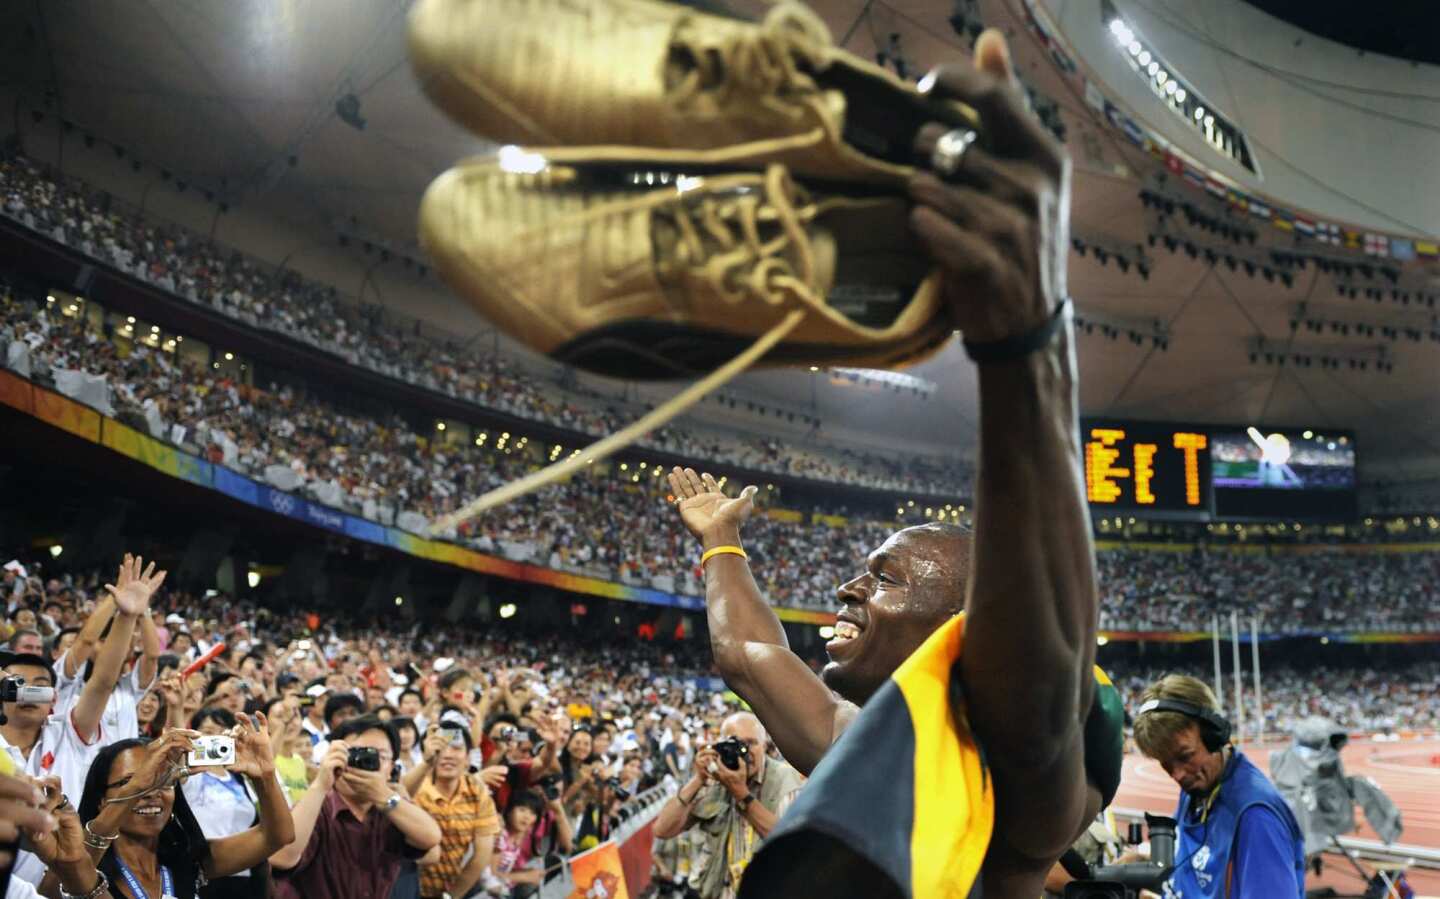 Usain Bolt celebrates with the crowd after Jamaica won the gold medal in the 400-meter relay at the 2008 Beijing Olympics.